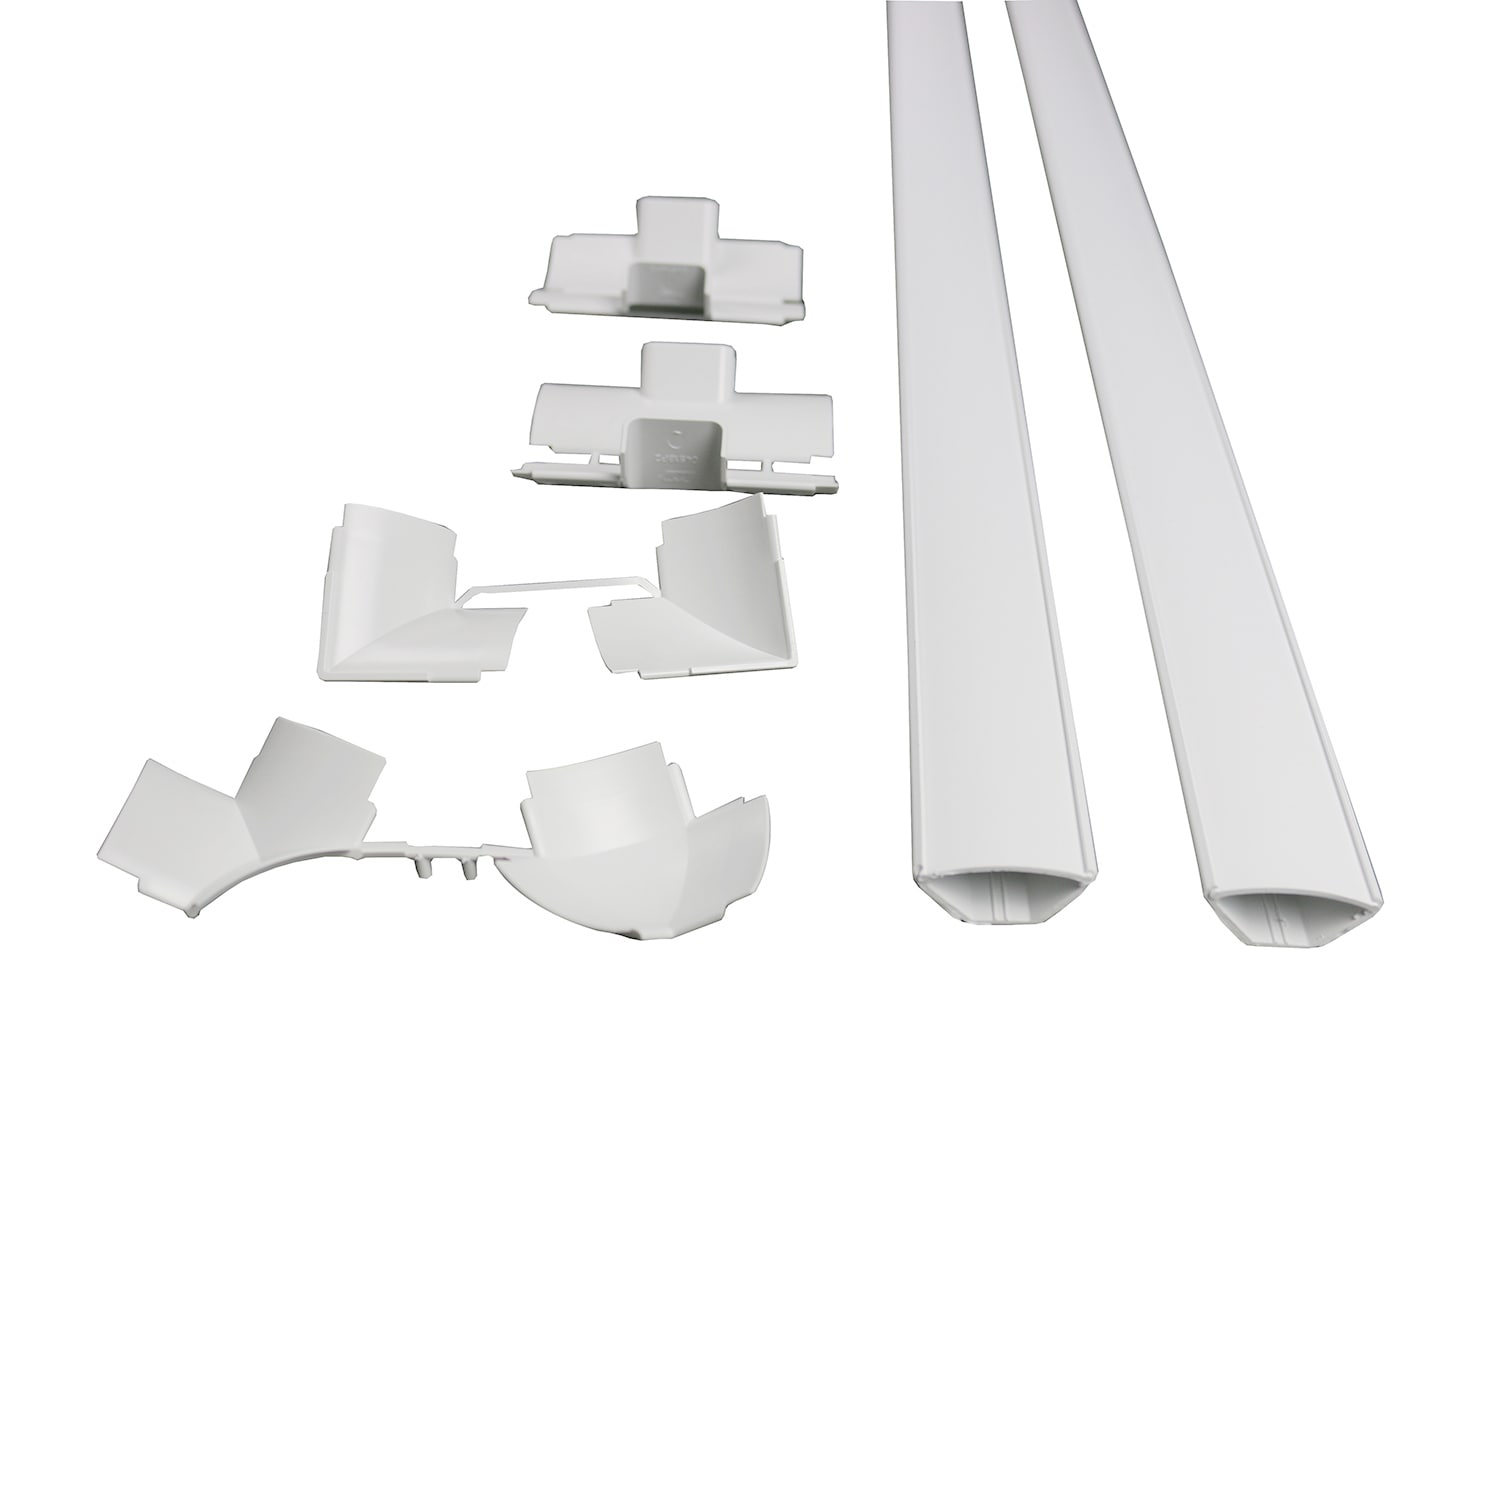 Wiremold® CableMate Kit - White